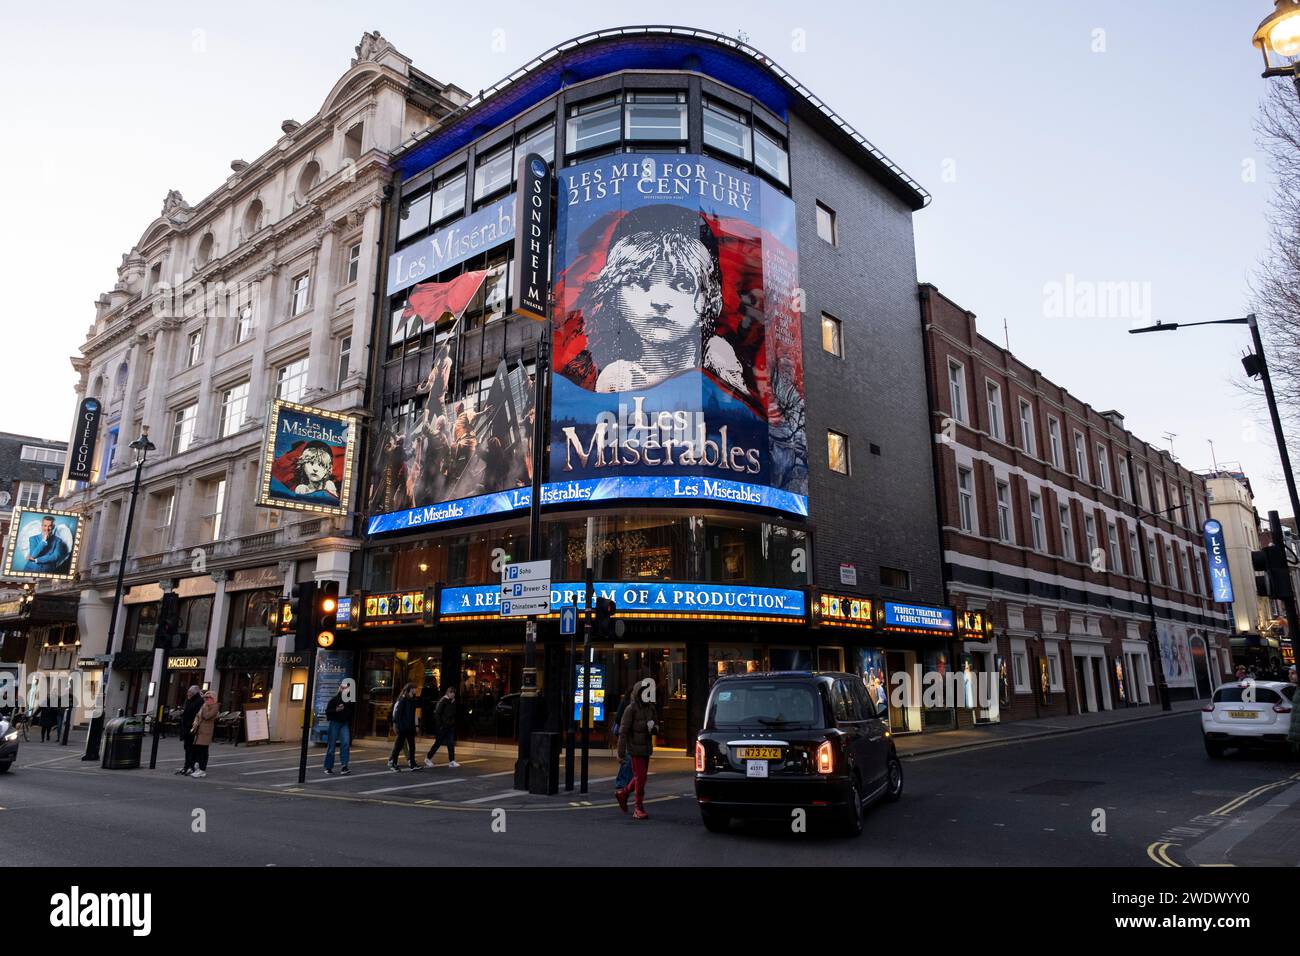 West End theatre show poster for Les Miserables at the Sondheim Theatre on Shaftesbury Avenue at the heart of Londons Theatreland on 19th January 2024 in London, United Kingdom. West End theatre is mainstream professional theatre staged in the large theatres in and near the West End of London, which has also been nicknamed Theatreland. West End theatre is usually considered to represent the highest level of commercial theatre. Stock Photo